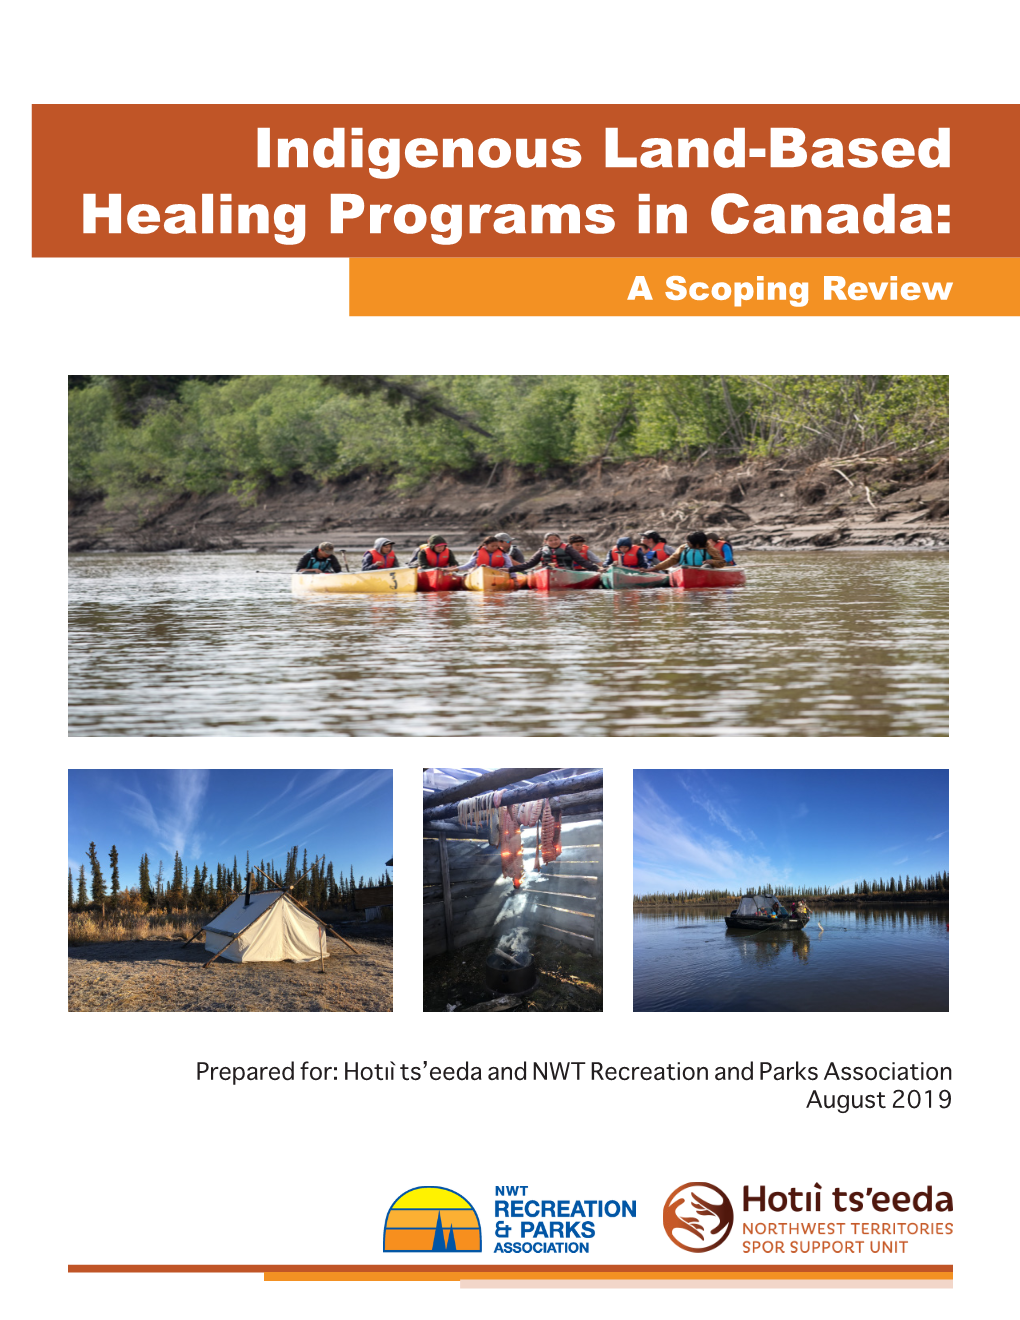 Indigenous Land-Based Healing Programs in Canada: a Scoping Review